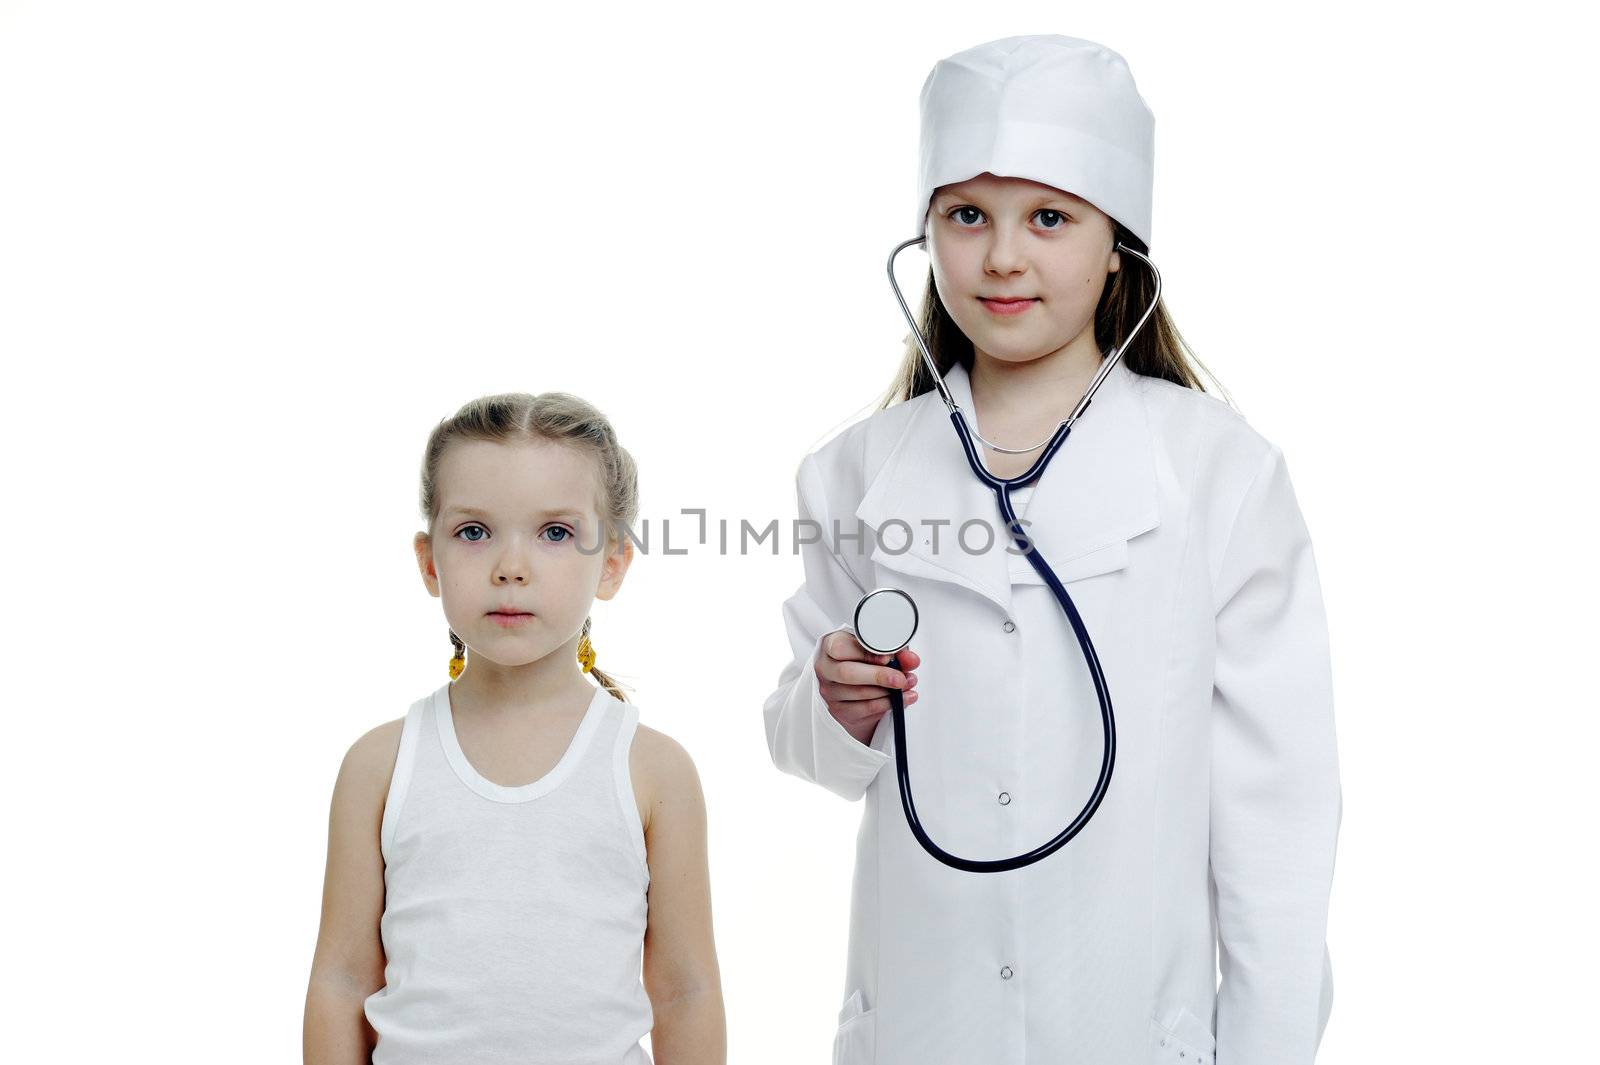 An image of two little girls playing doctors